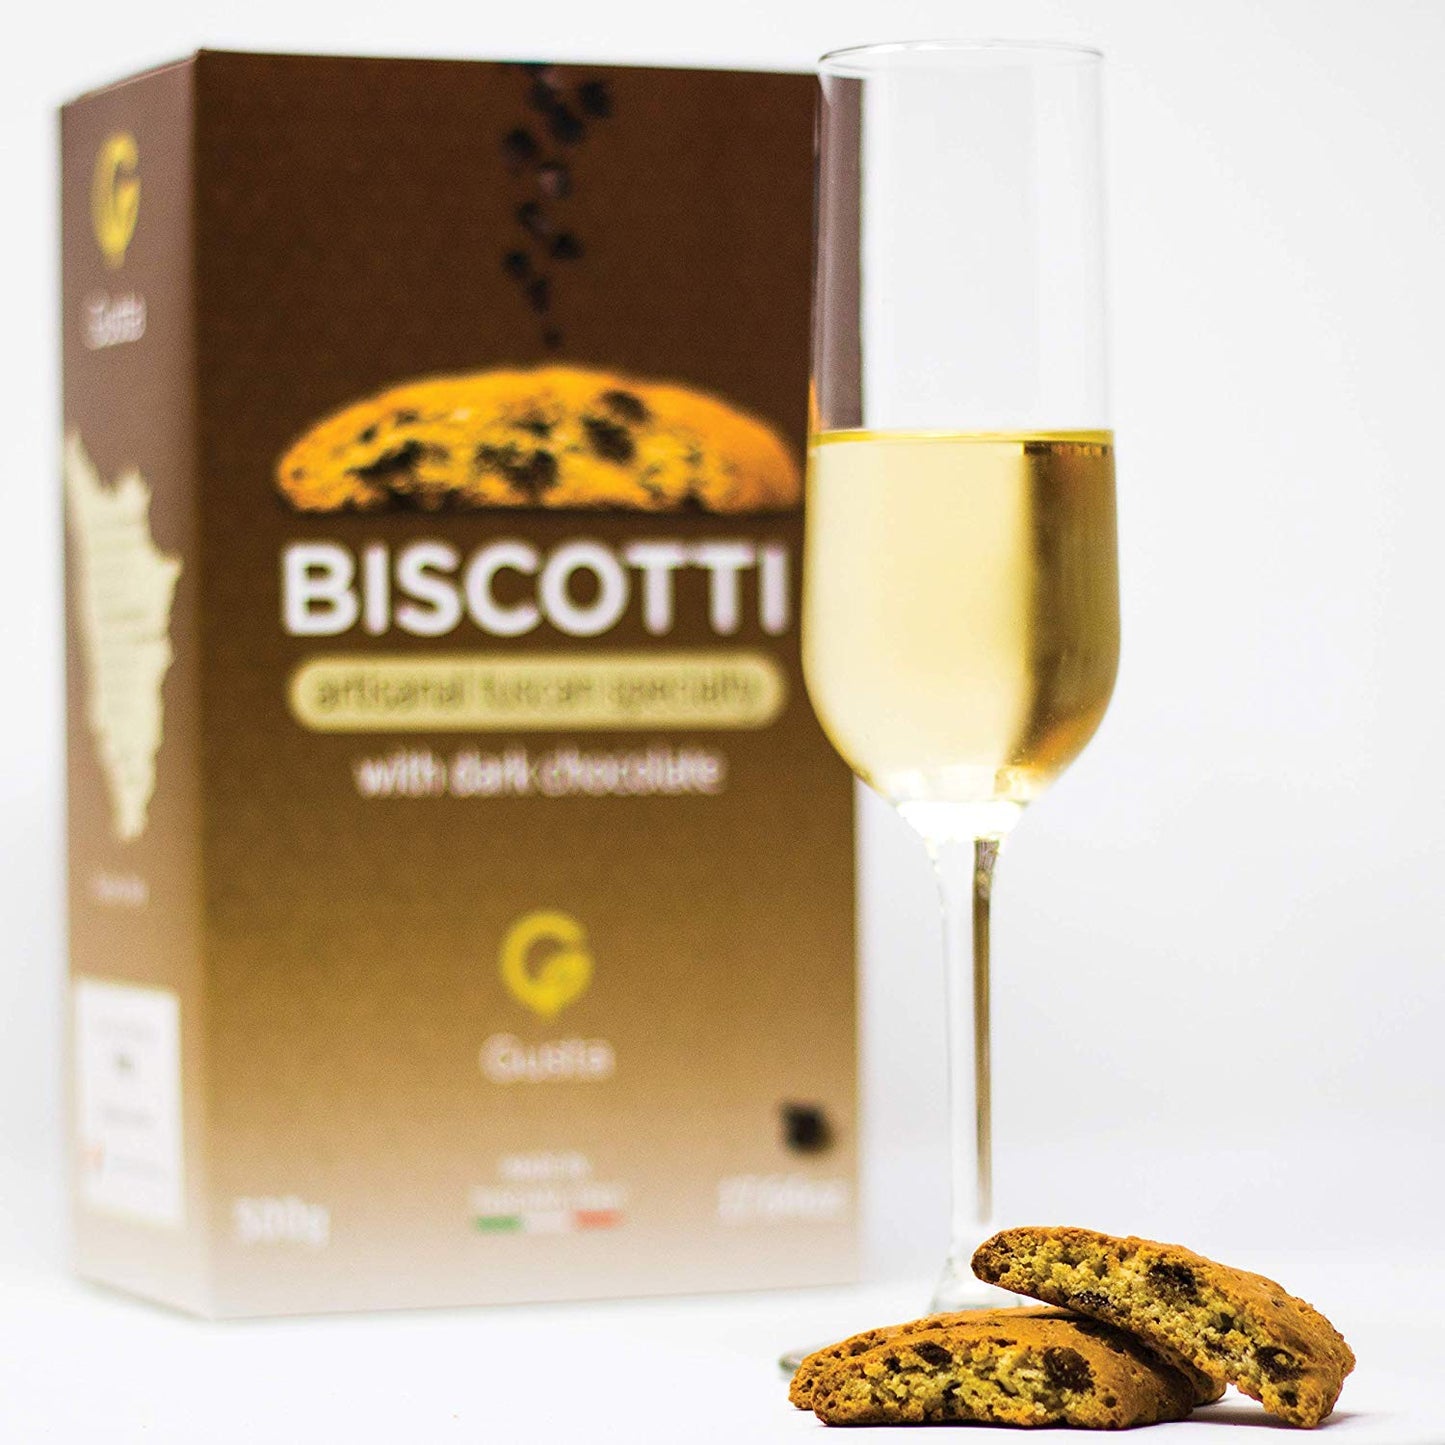 Gusta Authentic Biscotti Cookies Made in Tuscany, Italy - Chocolate